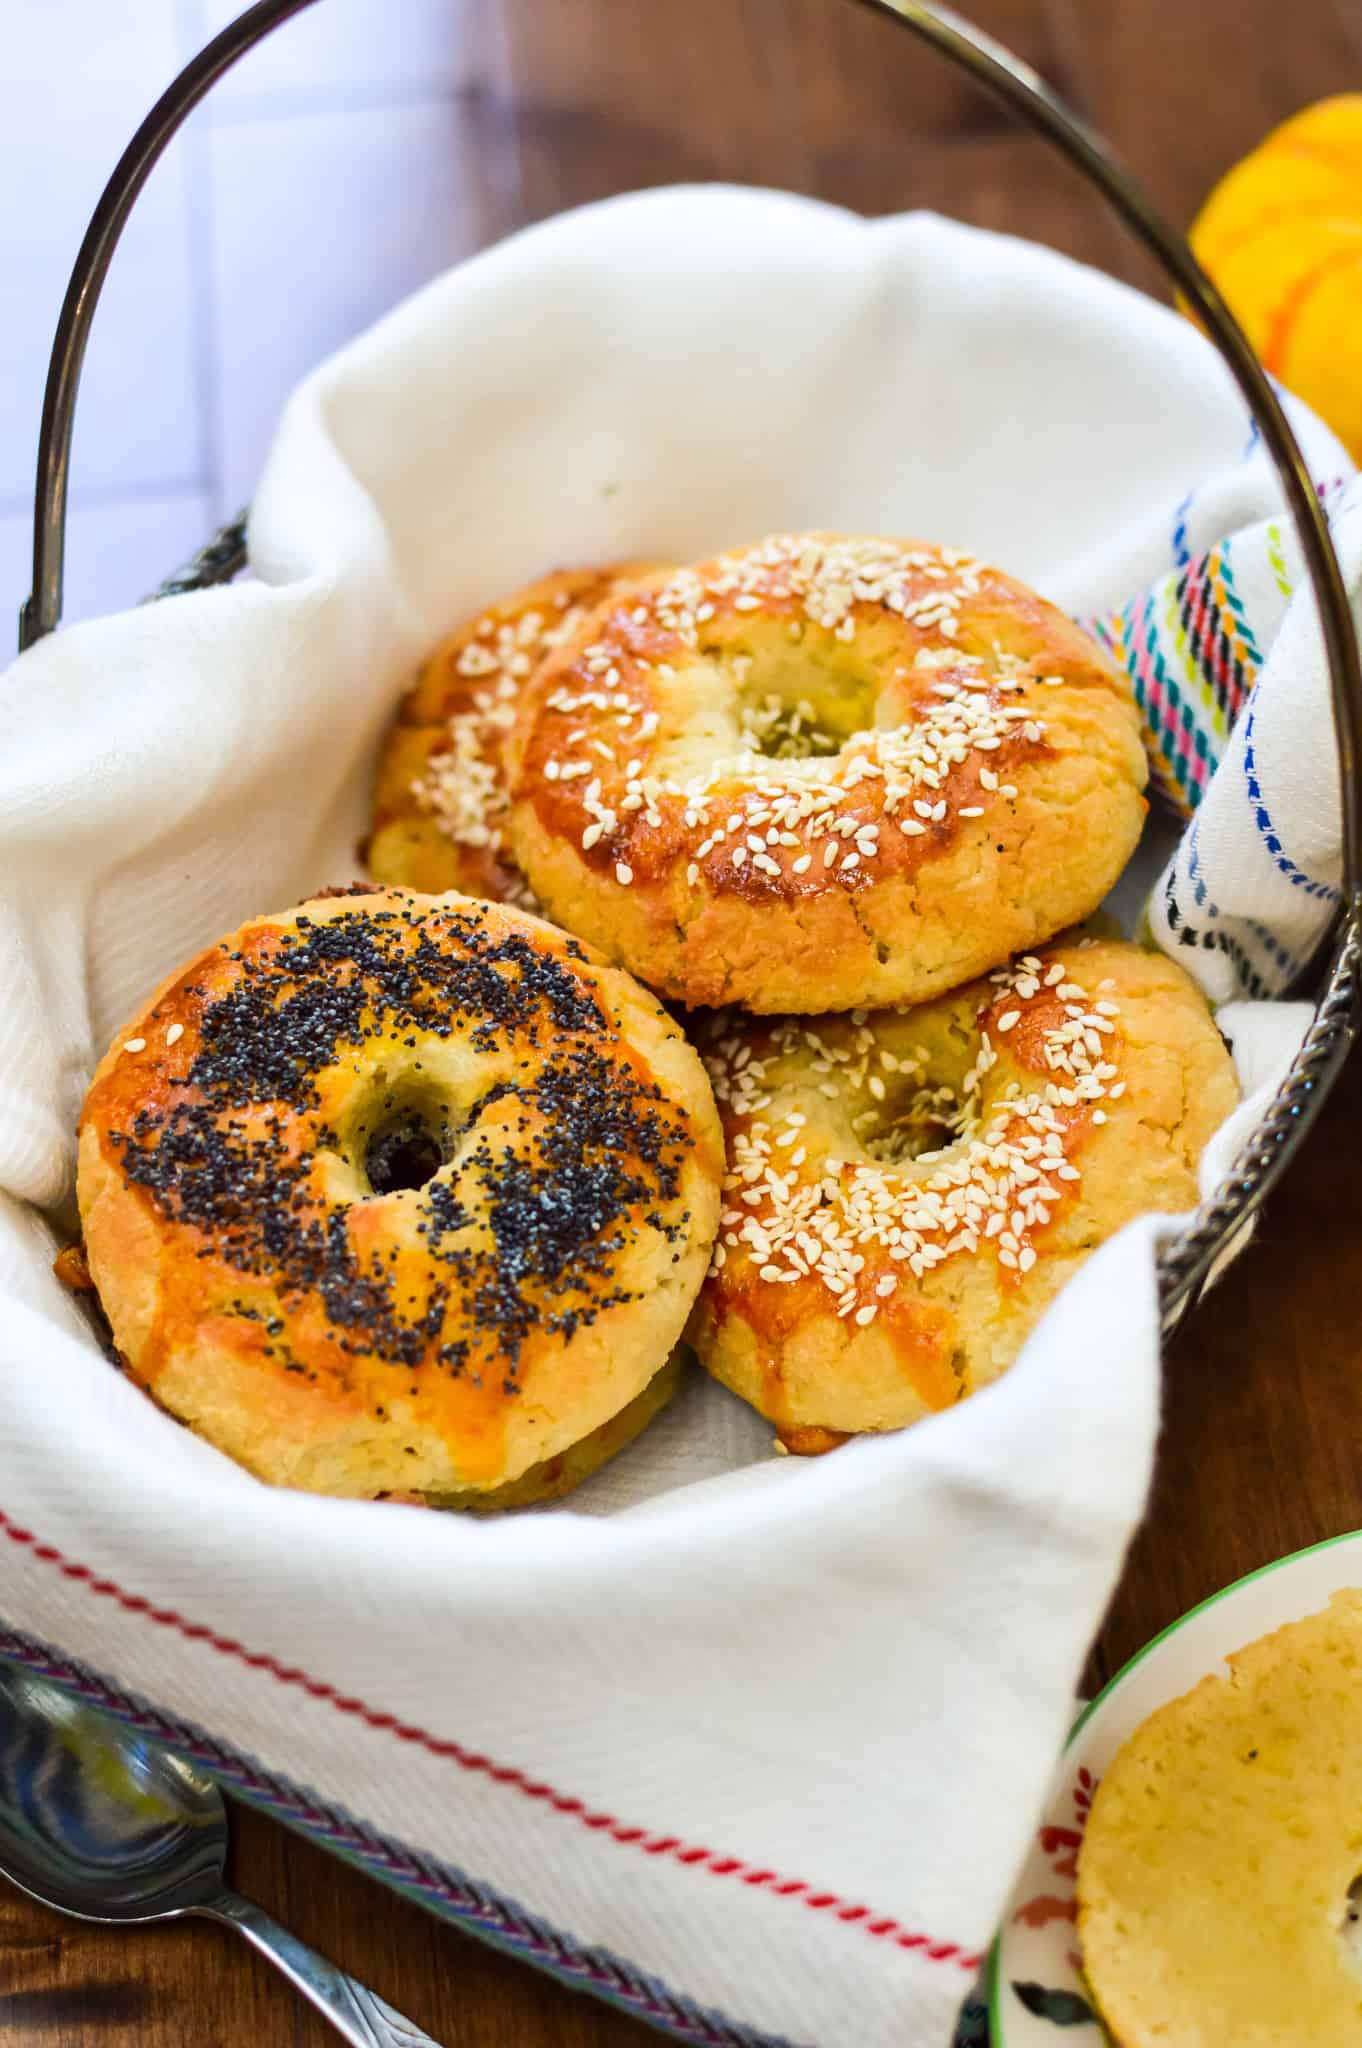 A basket full of paleo bagels topped with sesame seeds.